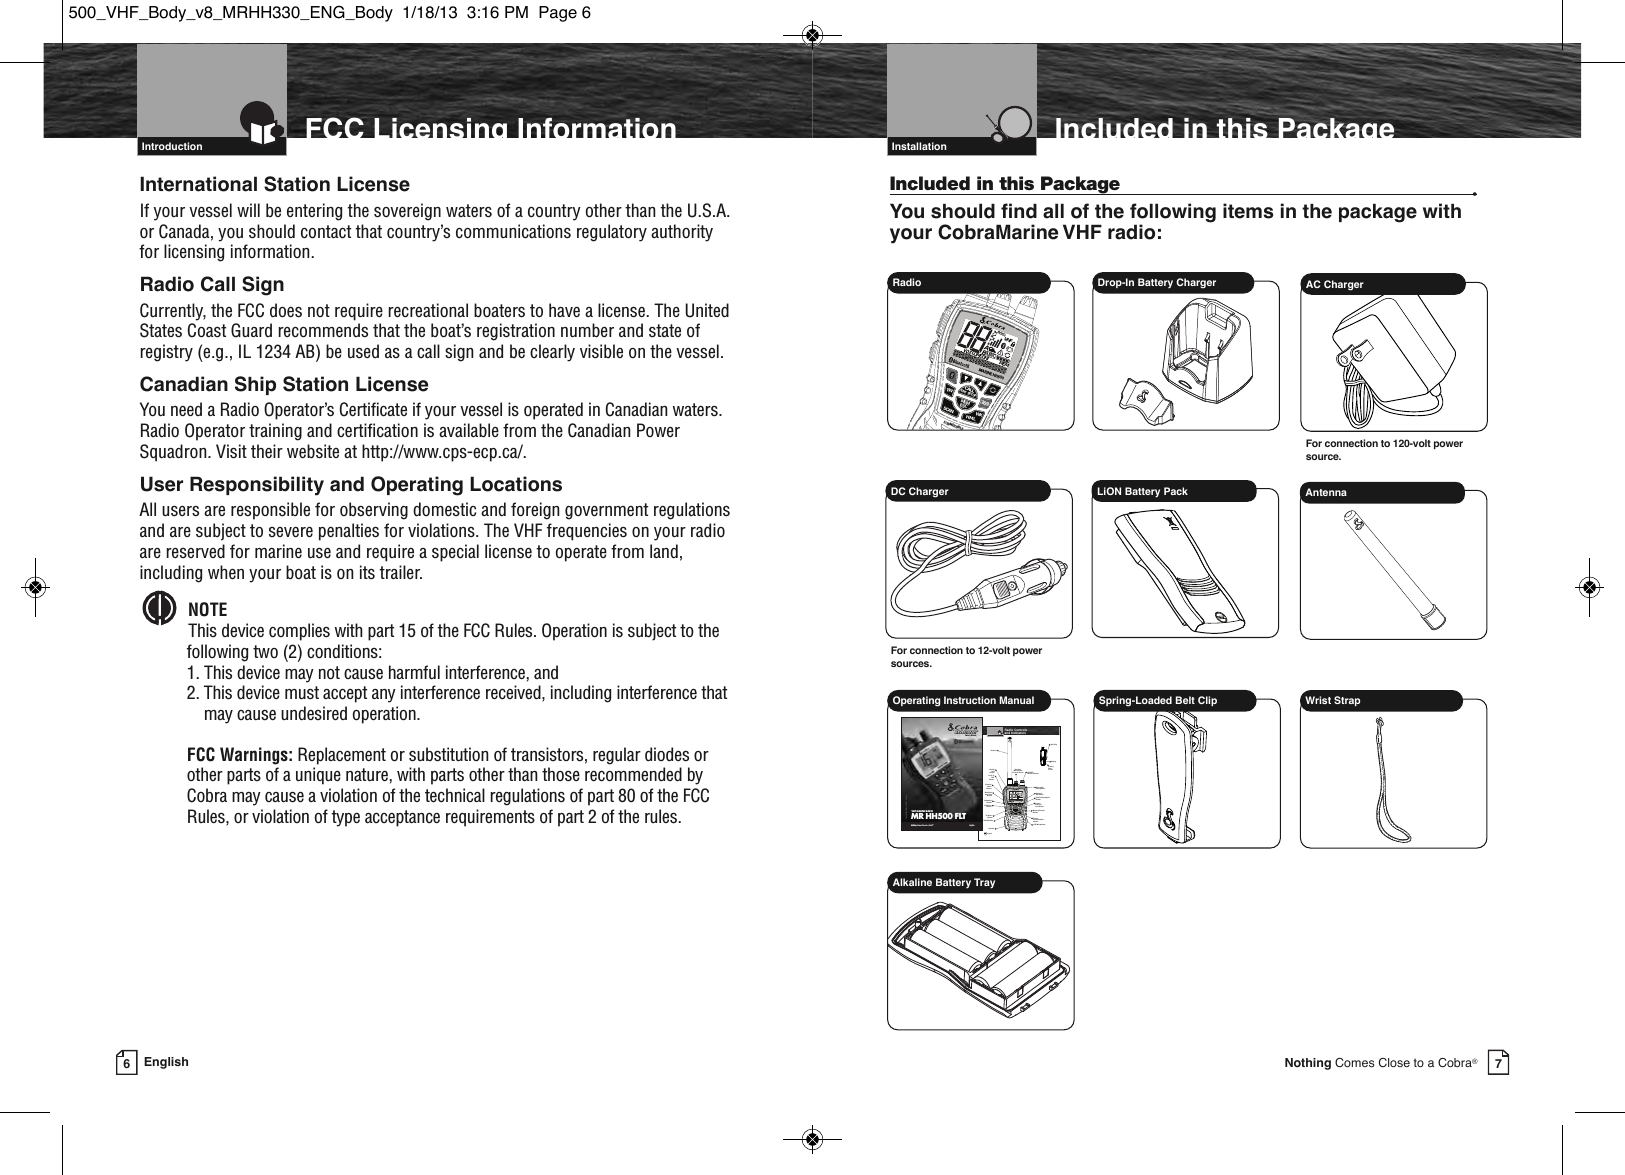 Page 6 of Cobra Electronics MRHH500 BT ACCESSORY IN MARINE RADIO User Manual MRHH330 ENG Body